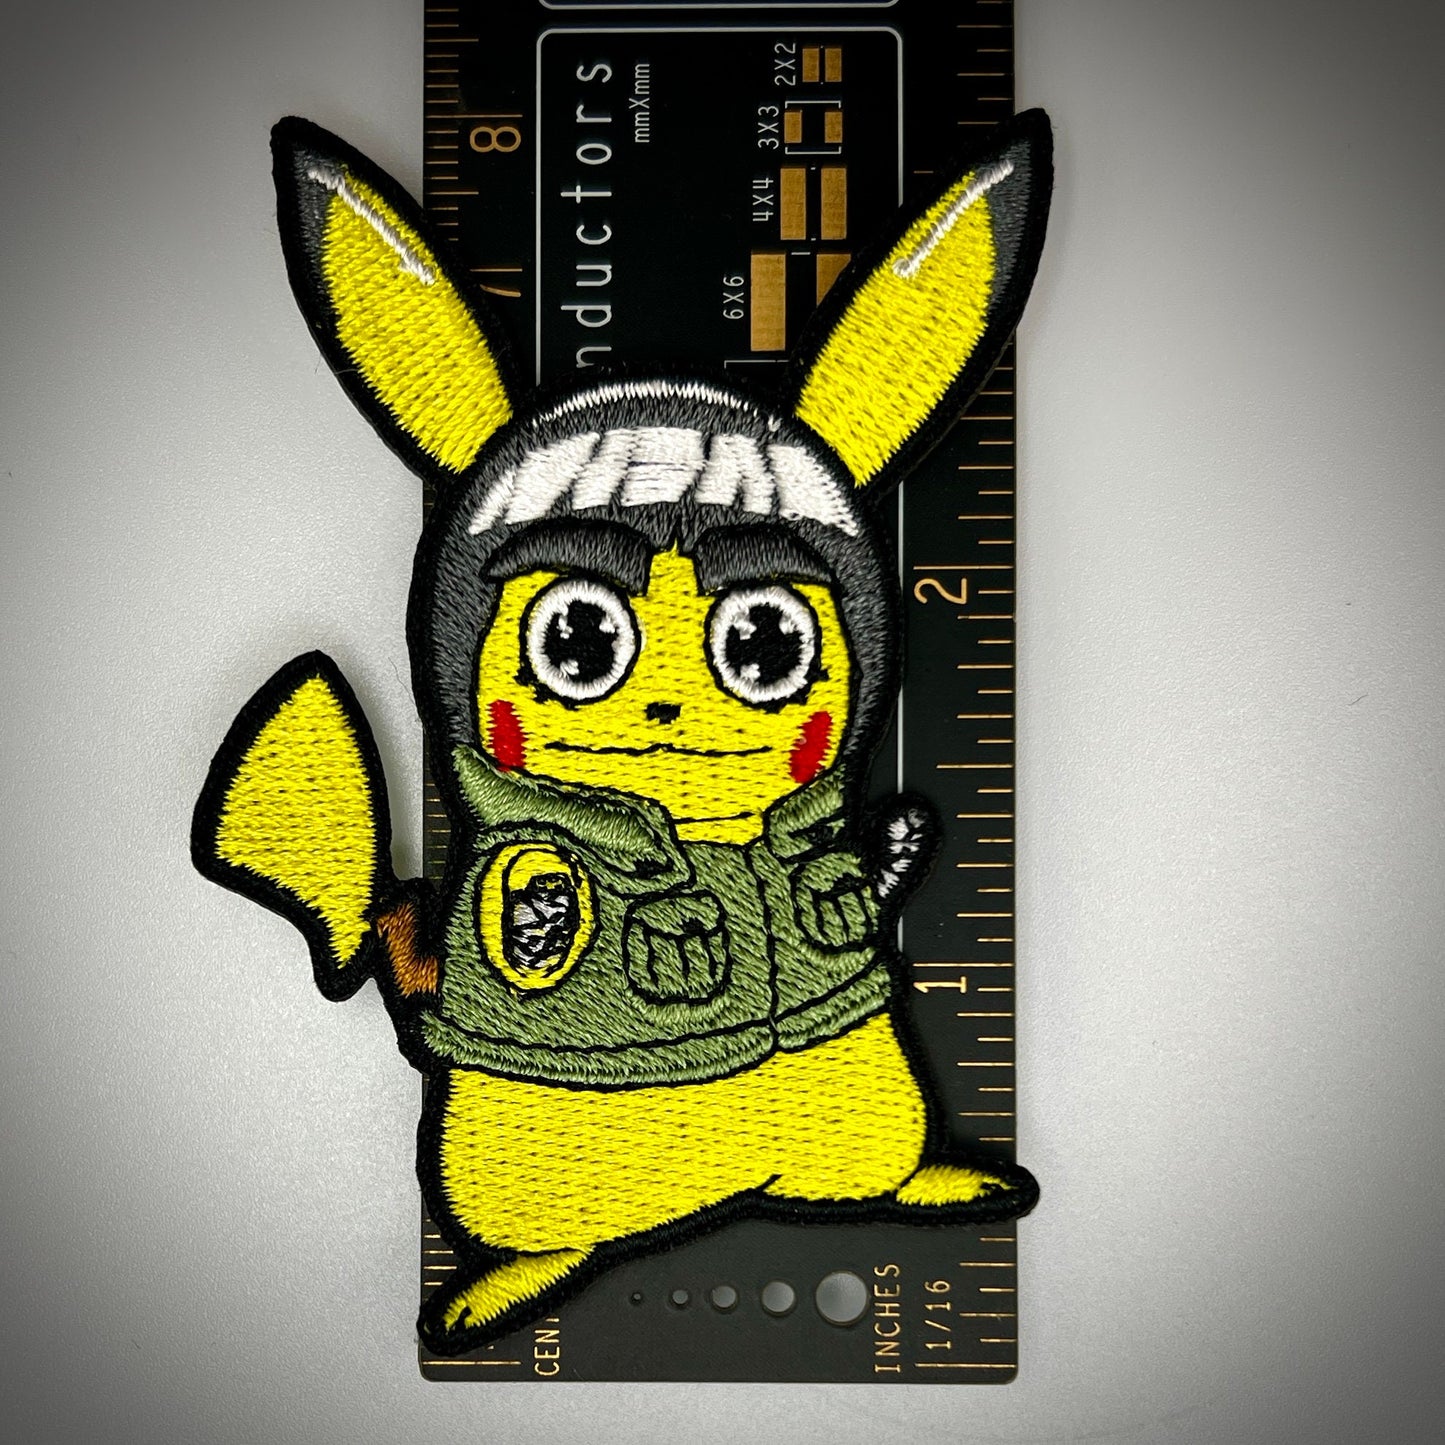 Embroidered Anime Iron-On Patches for Jacket, Shirt, Hat - Free Shipping!